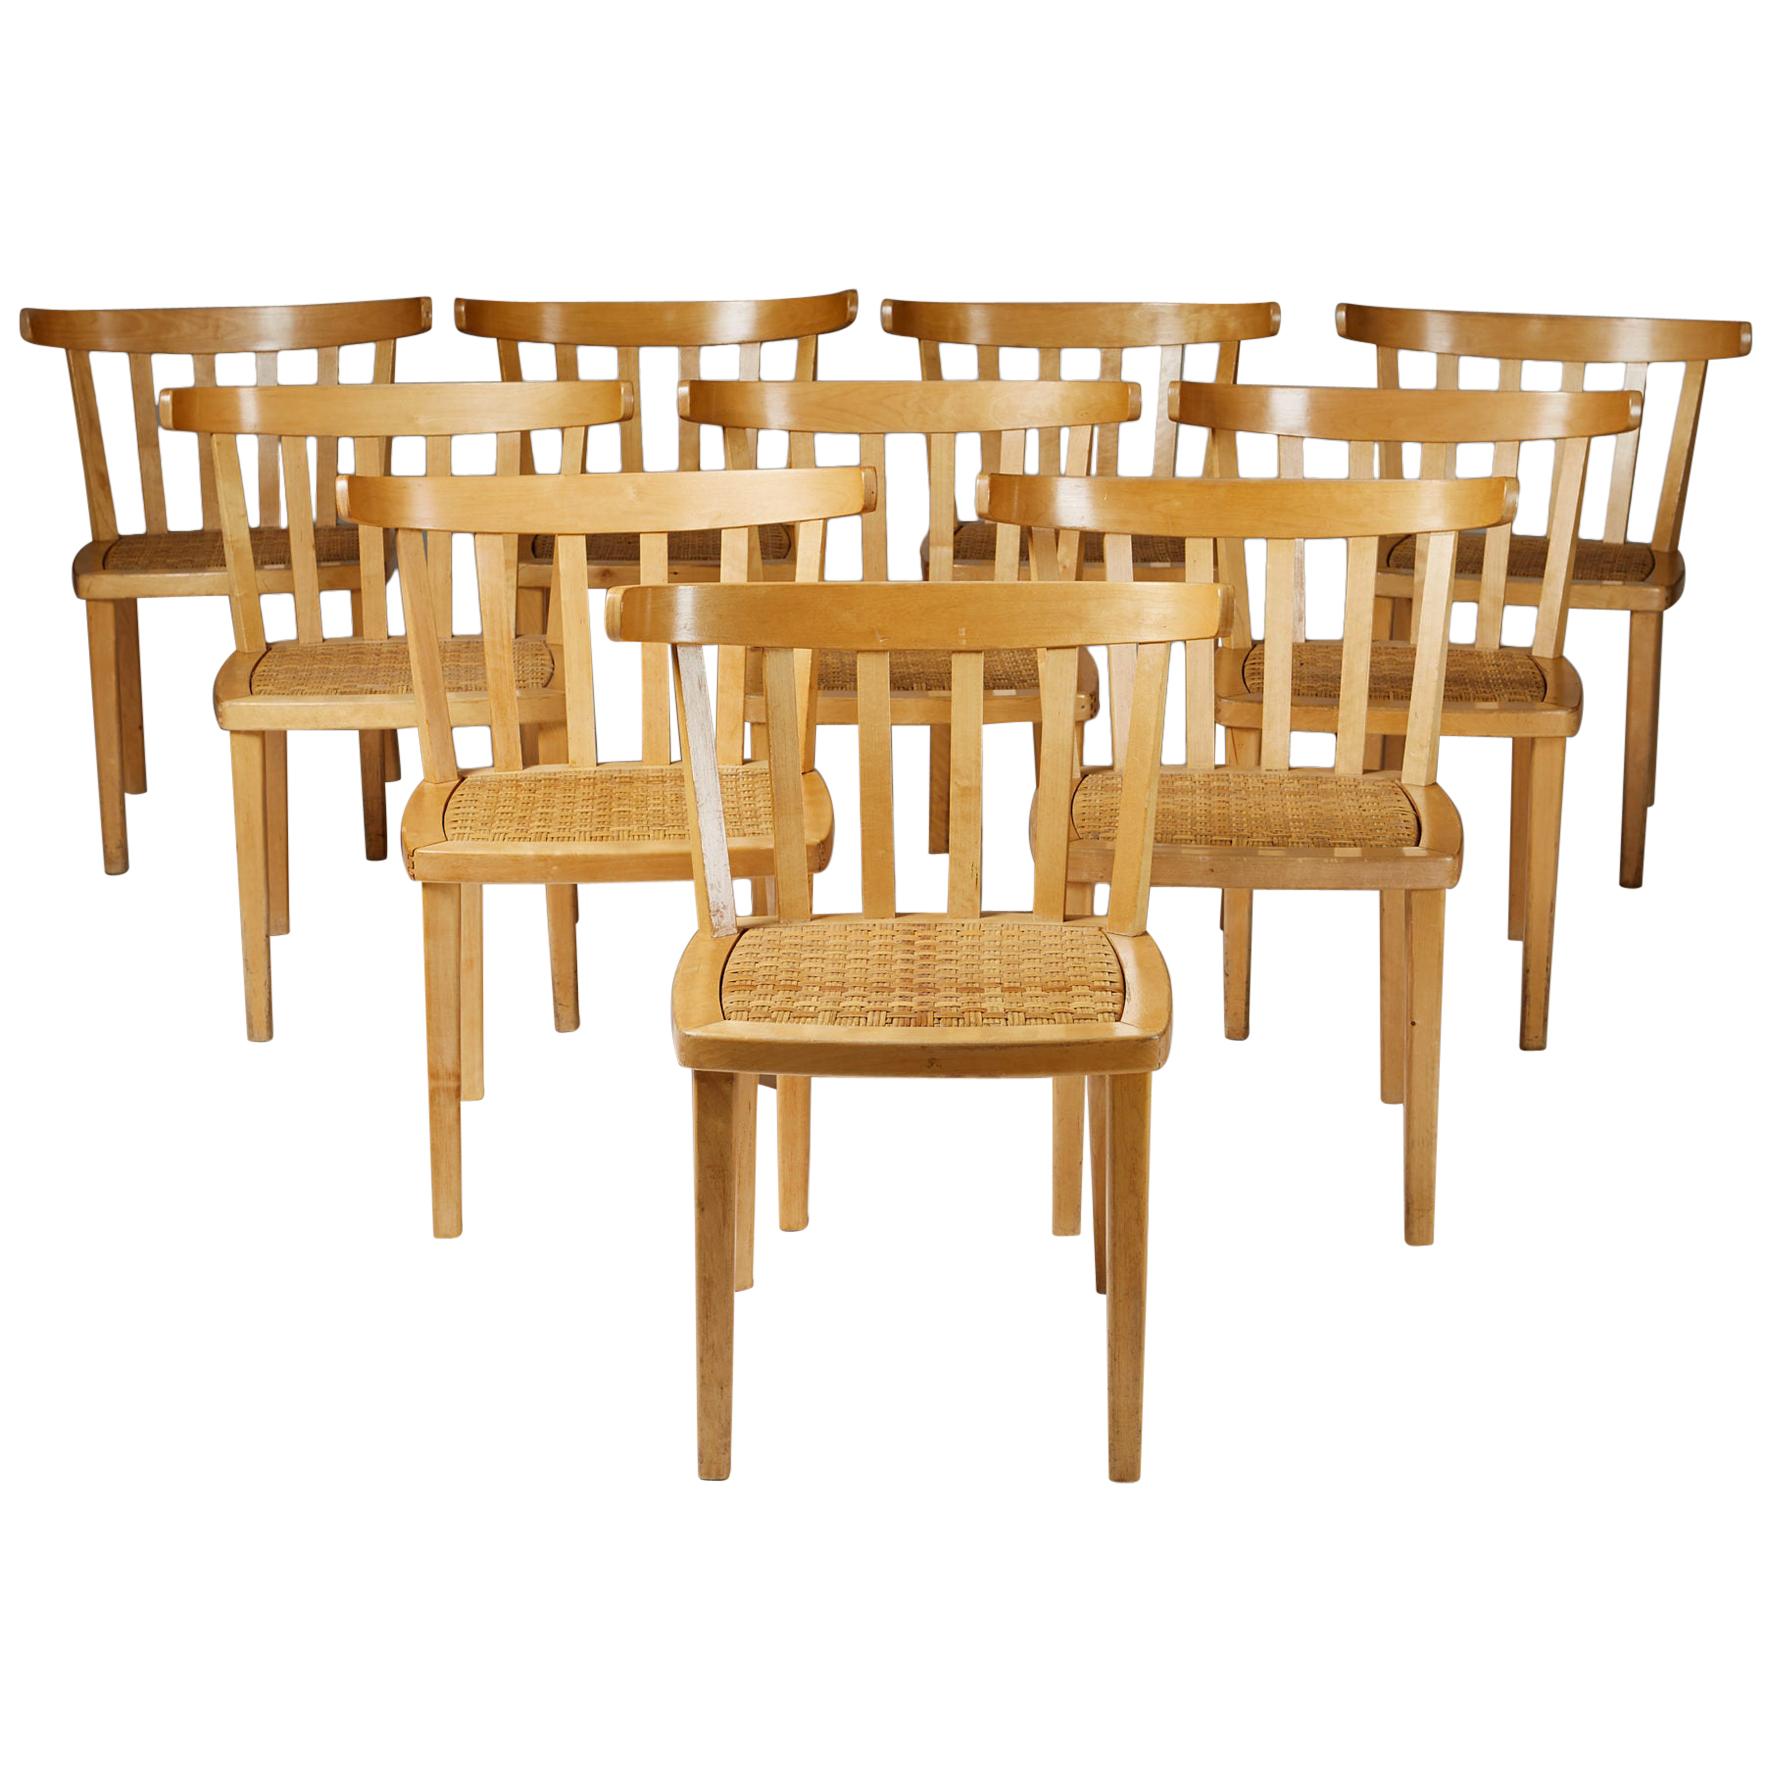 Set of Ten Dining Chairs Designed by Aino Aalto for Artek, Finland, 1950s